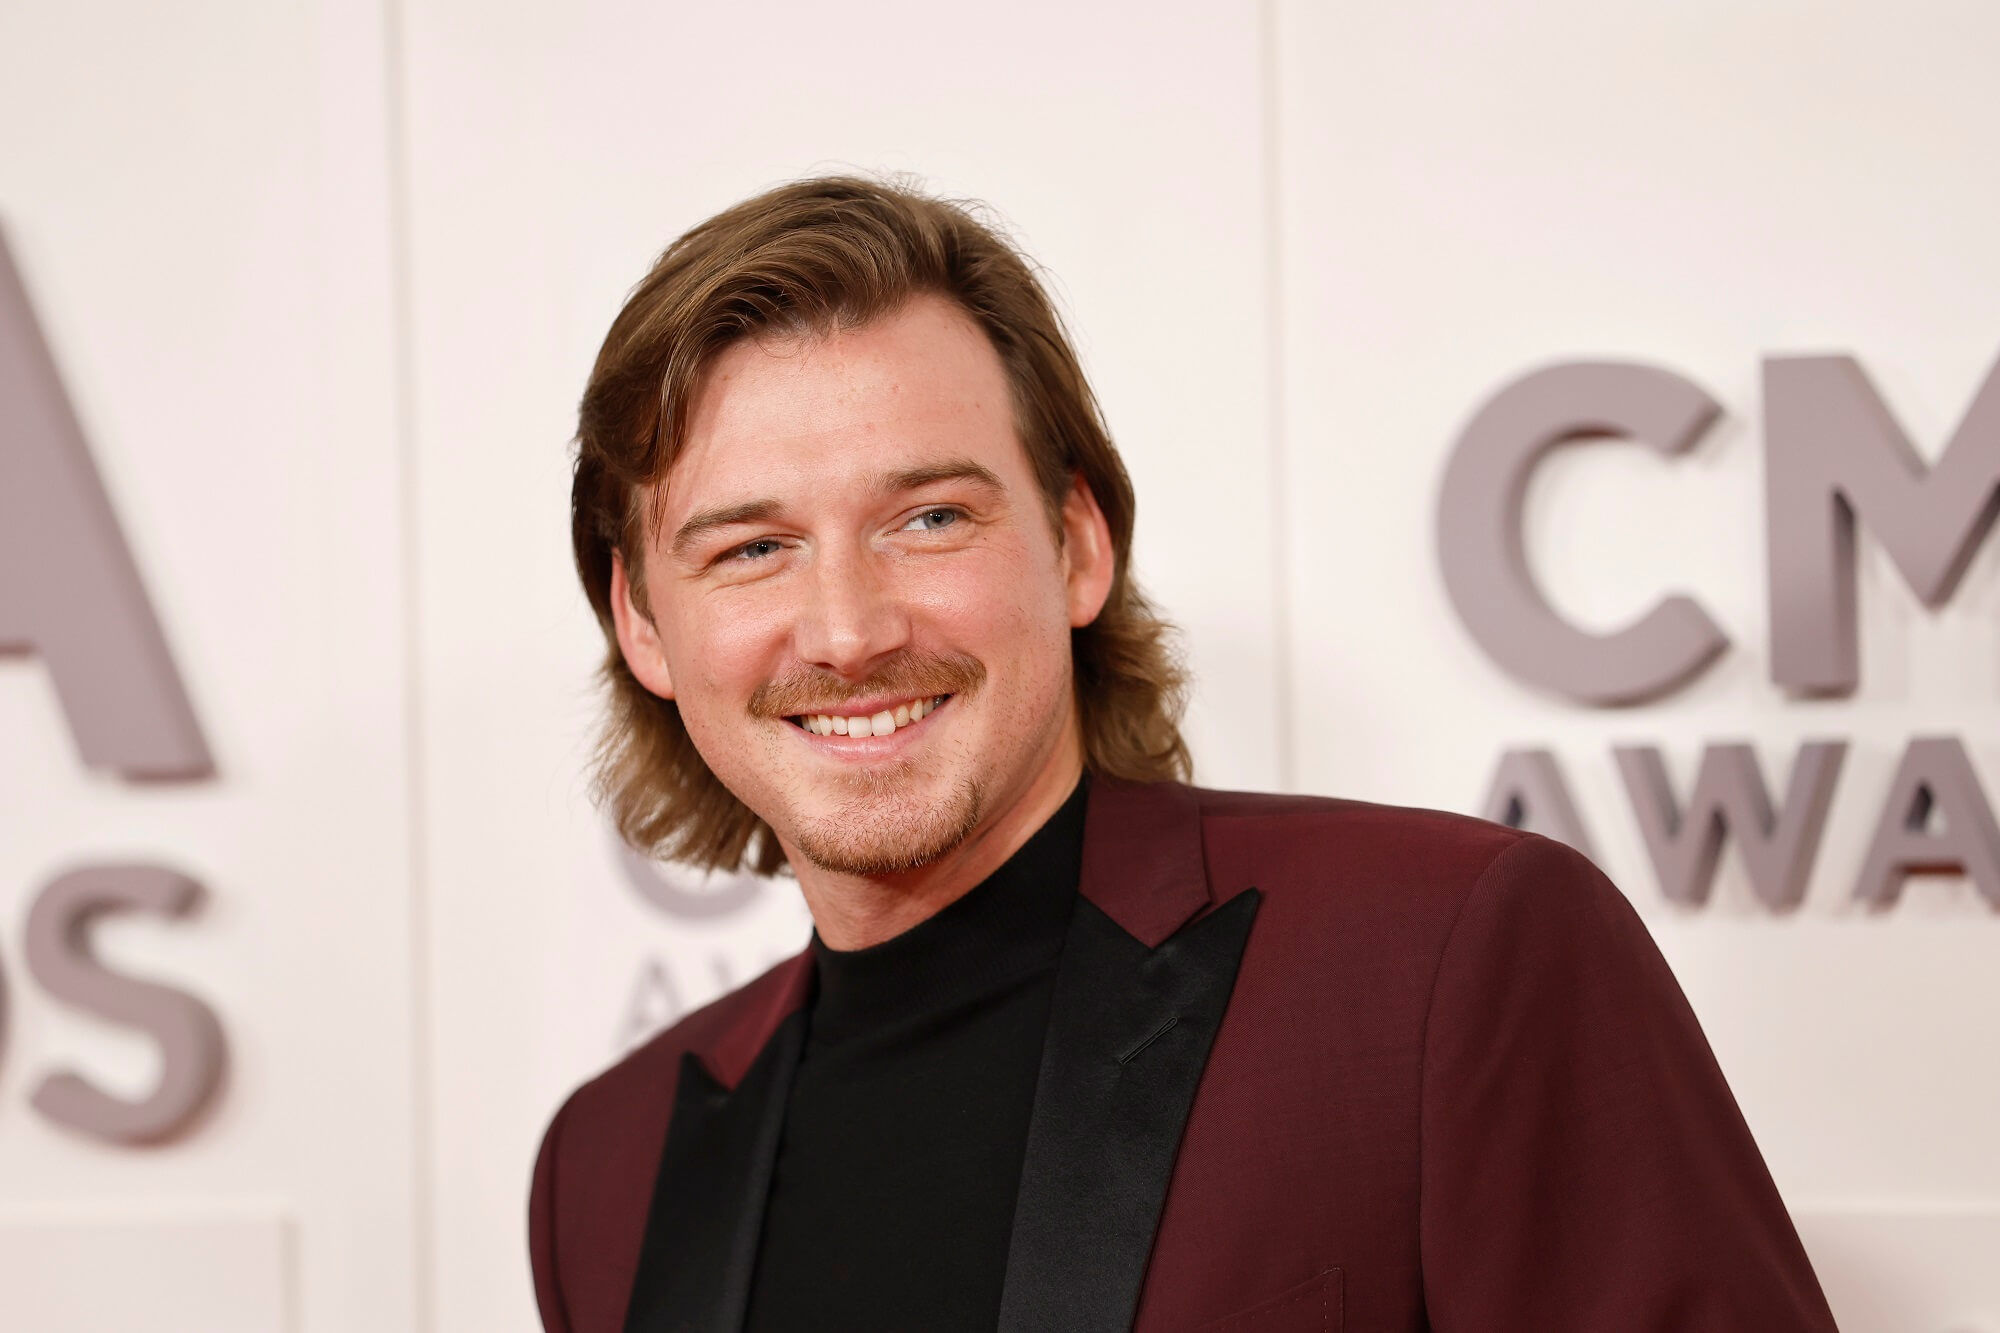 Morgan Wallen smiles while wearing a burgundy and black jacket